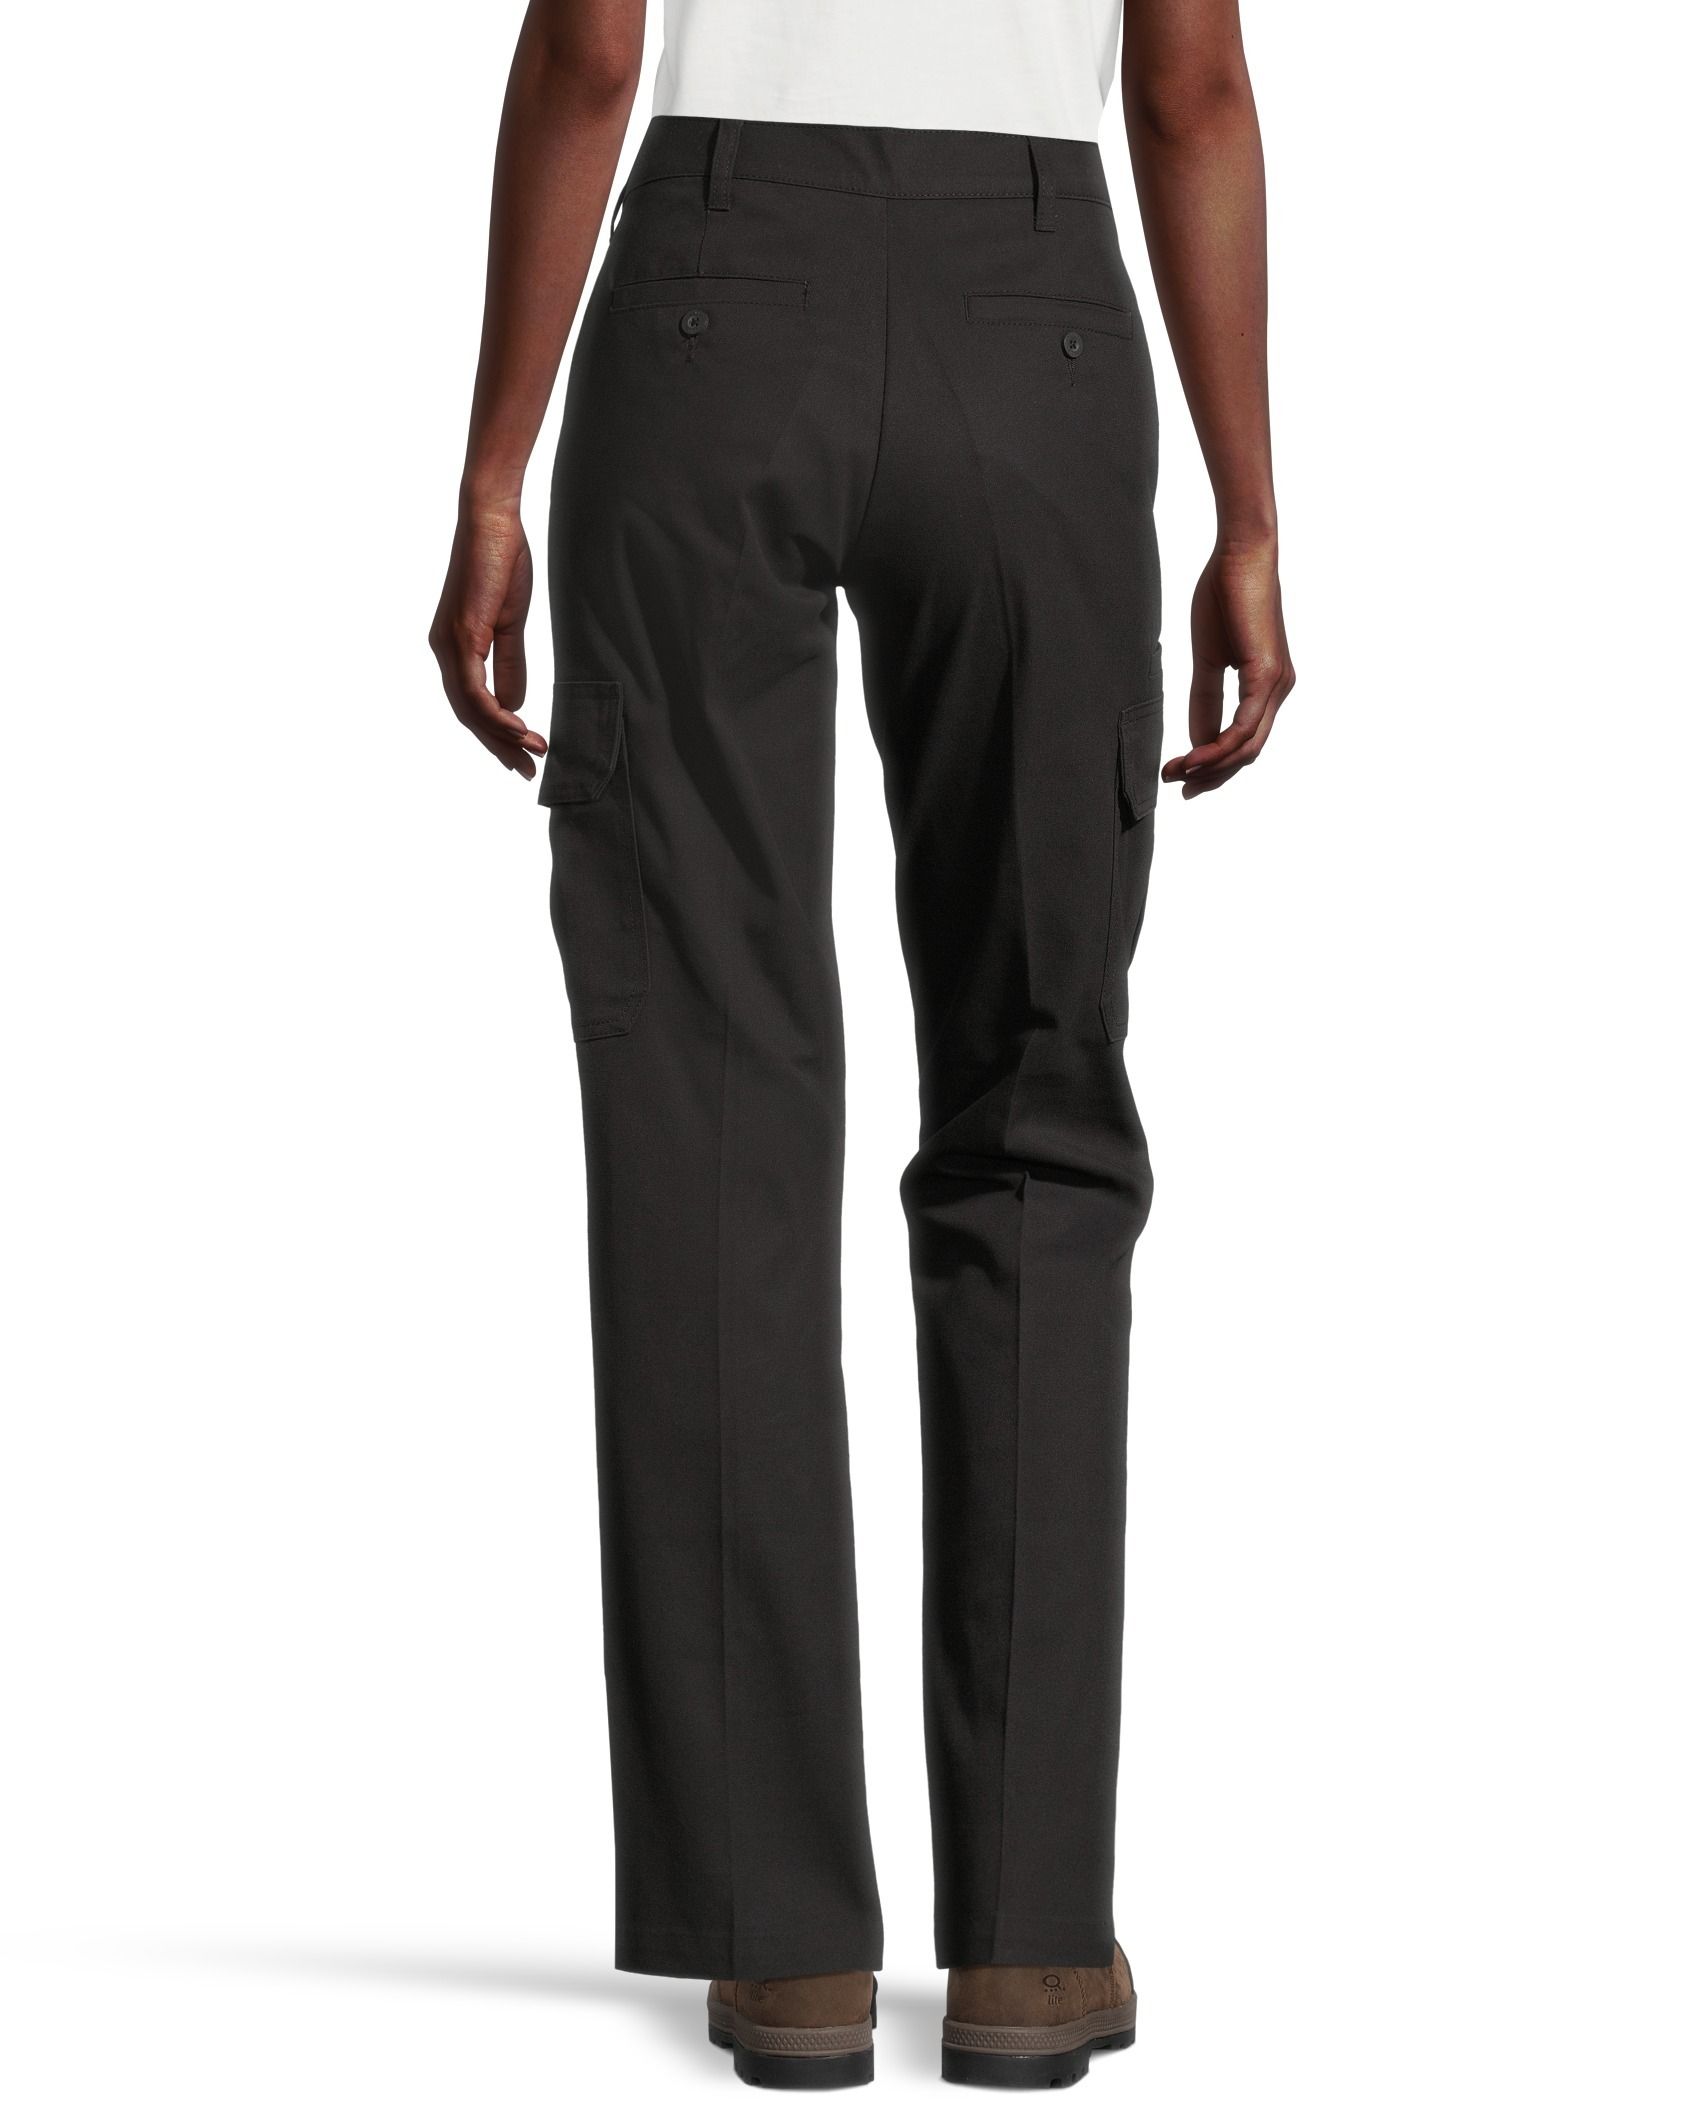 Benchmark Trousers Work Trousers, Women, Black, Poly-Cotton, Waist